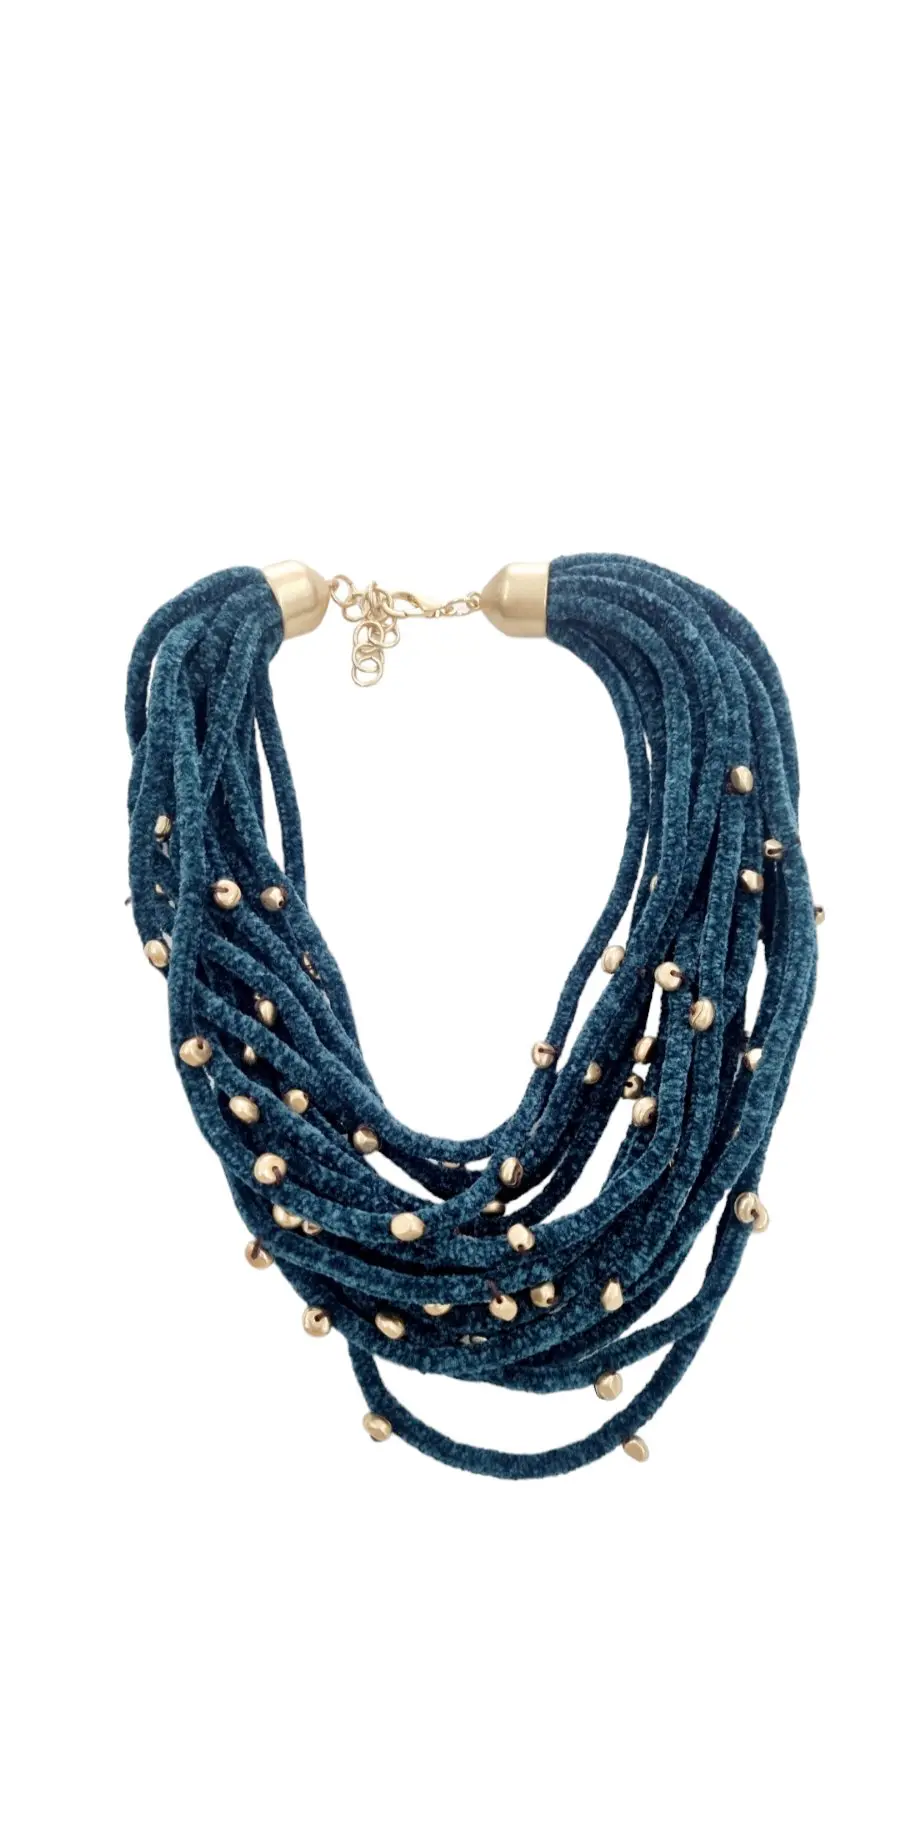 Adjustable choker necklace in petrol chenille and golden resins – Length 58cm